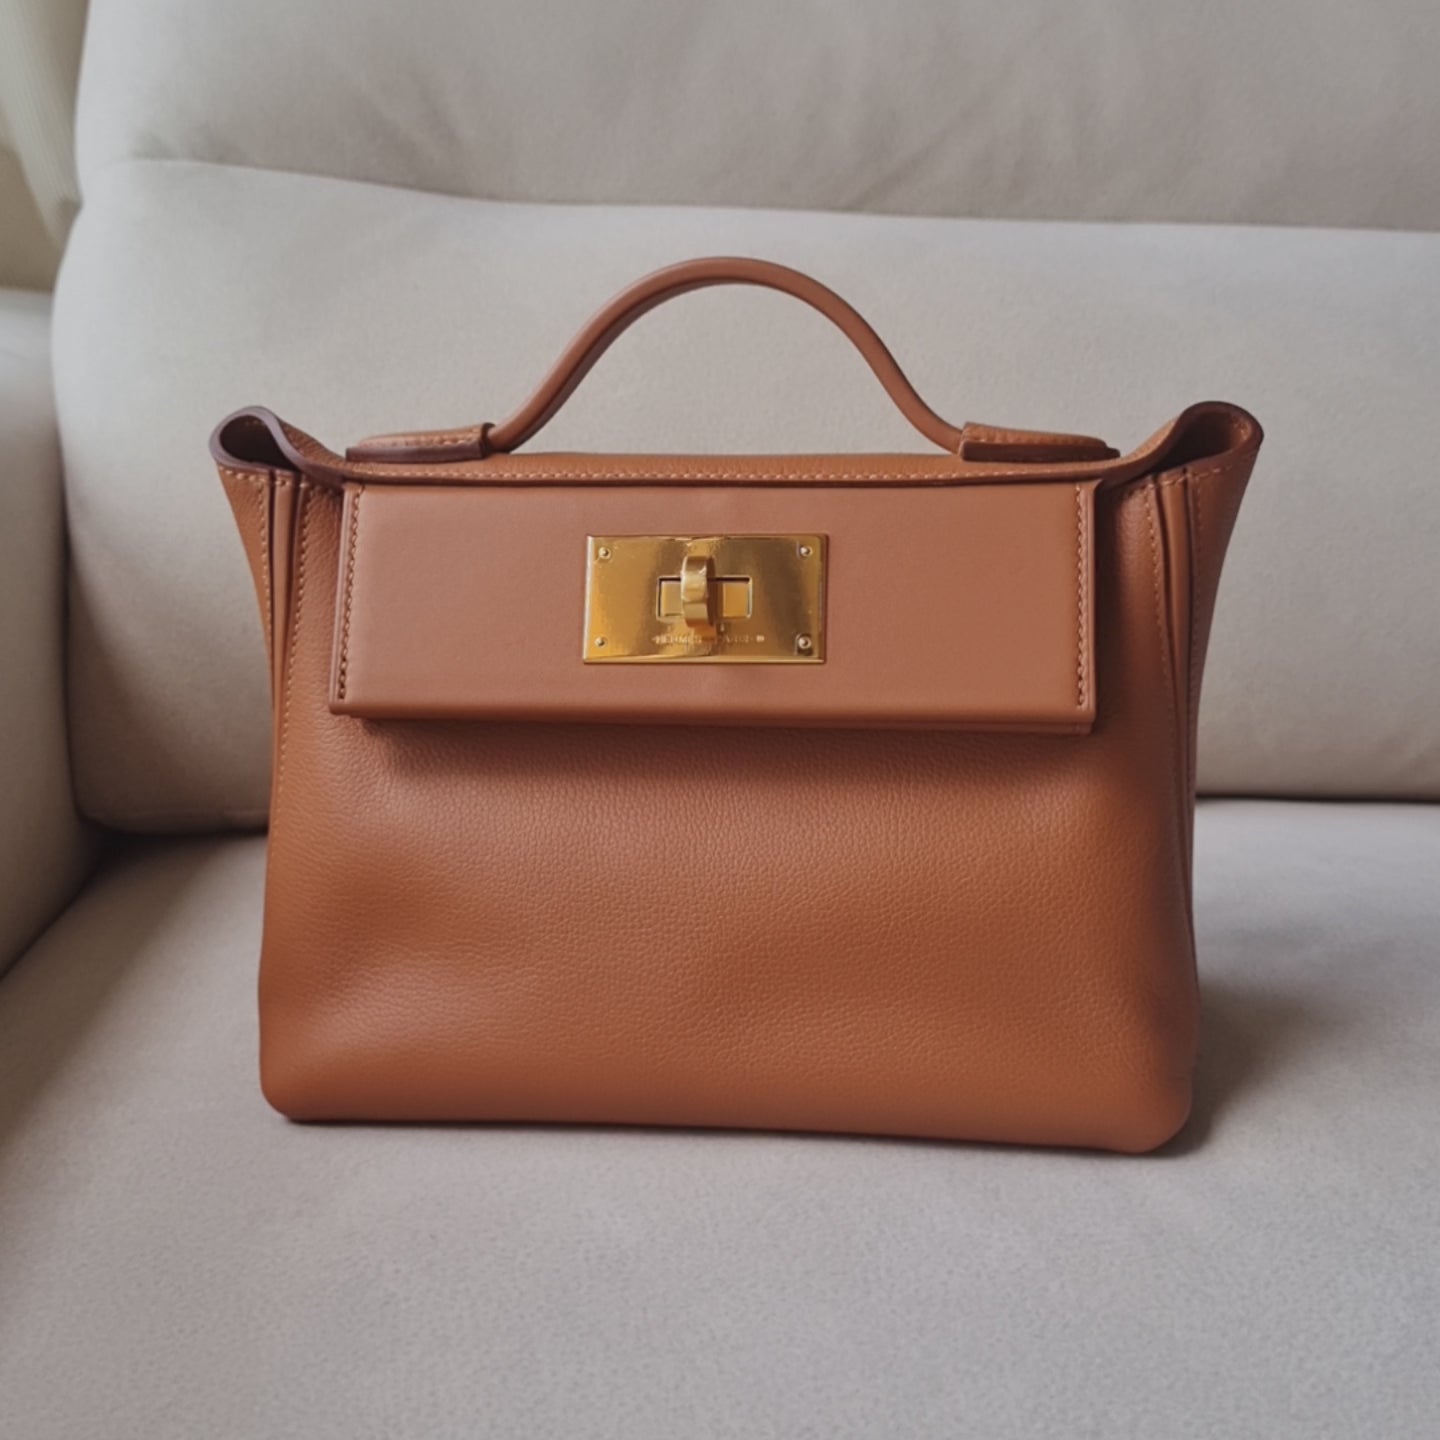 Hermes 2424 Mini Gold Evercolor with Gold Hw